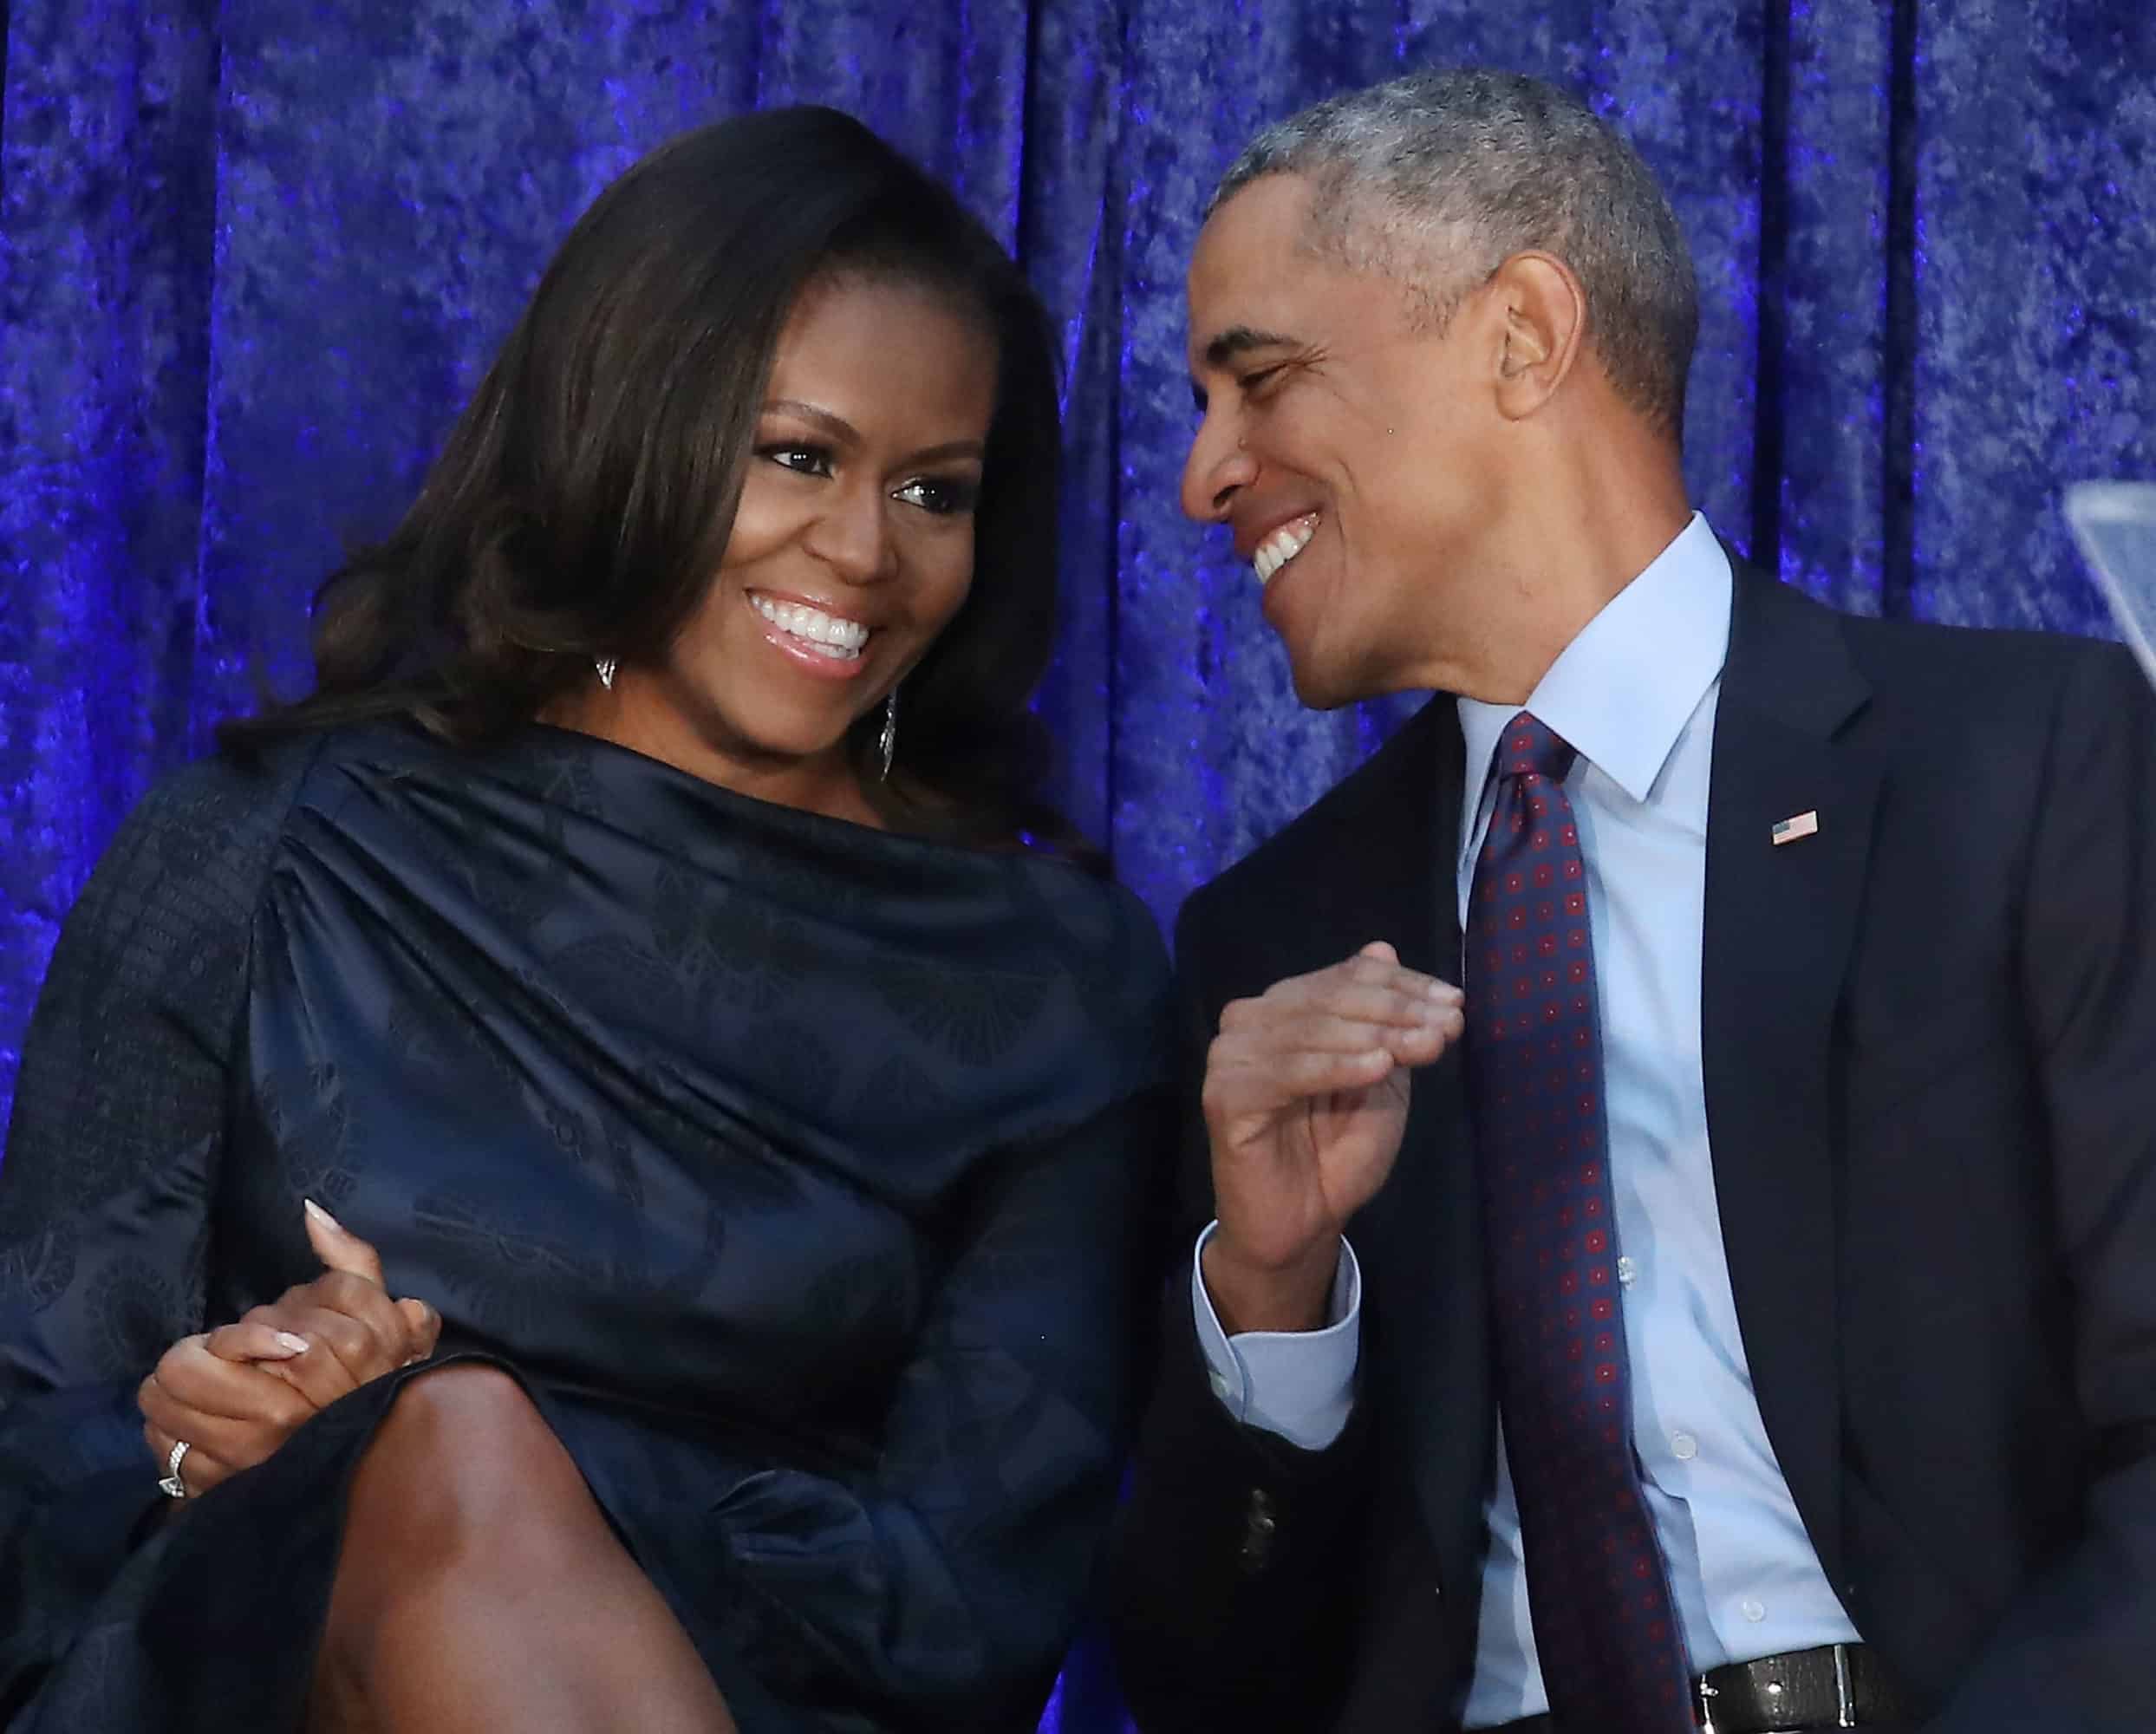 Barack And Michelle Obama Celebrate Their 29th Wedding Anniversary By Leaving Sweet Messages To Each Other On Social Media thumbnail